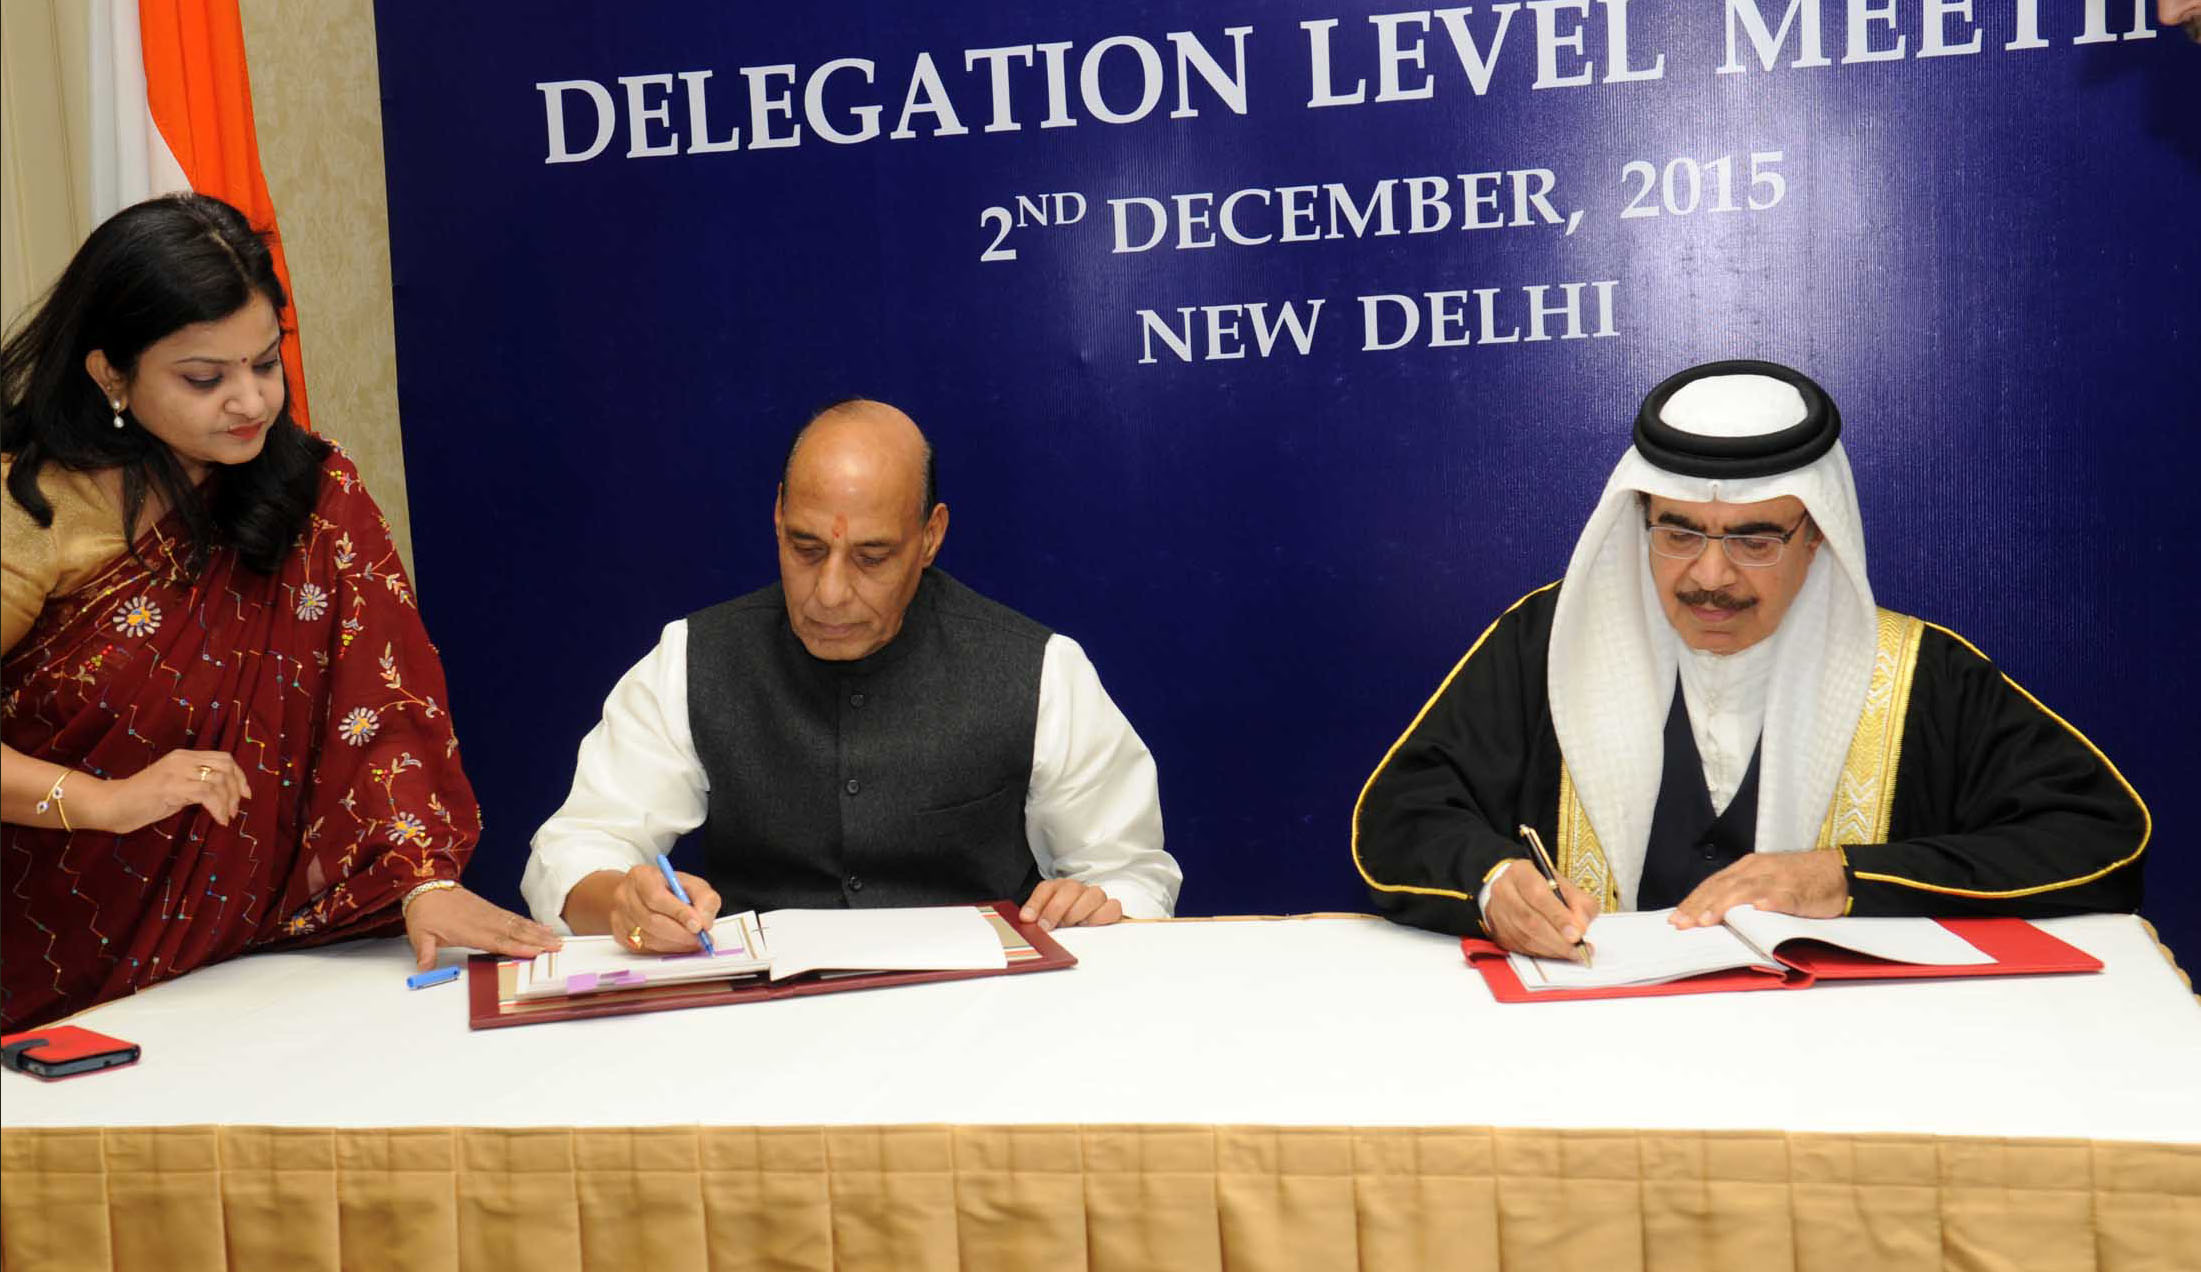 The Union Minister of Home Affairs Shri Rajnath Singh and the Minister of Interior of the Kingdom of Bahrain, Lt. General Shaikh Rashid bin Abdulla al Khalifa signing an Agreement on bilateral cooperation between India and Bahrain, in New Delhi on December 02, 2015.